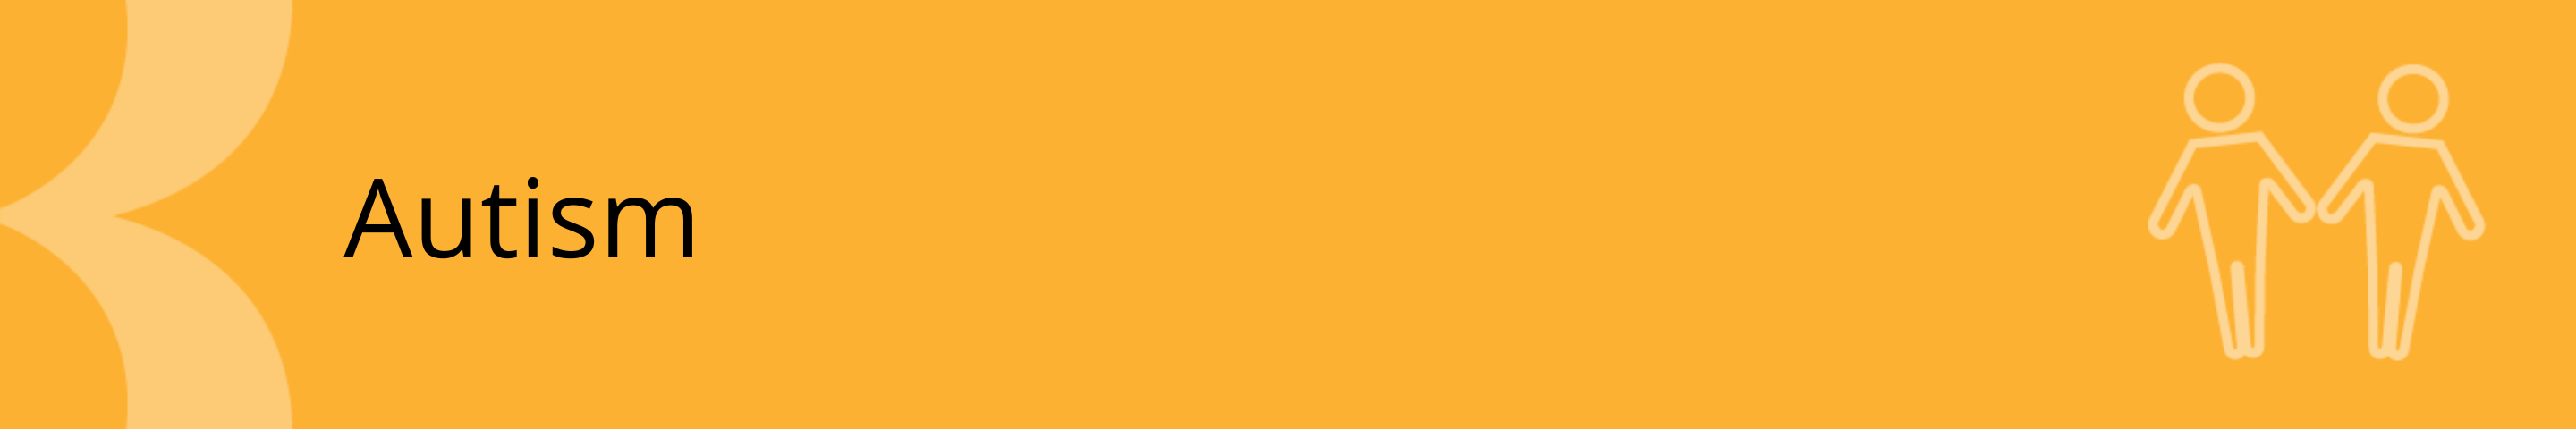 Mango color banner with two individual shapes holding hands